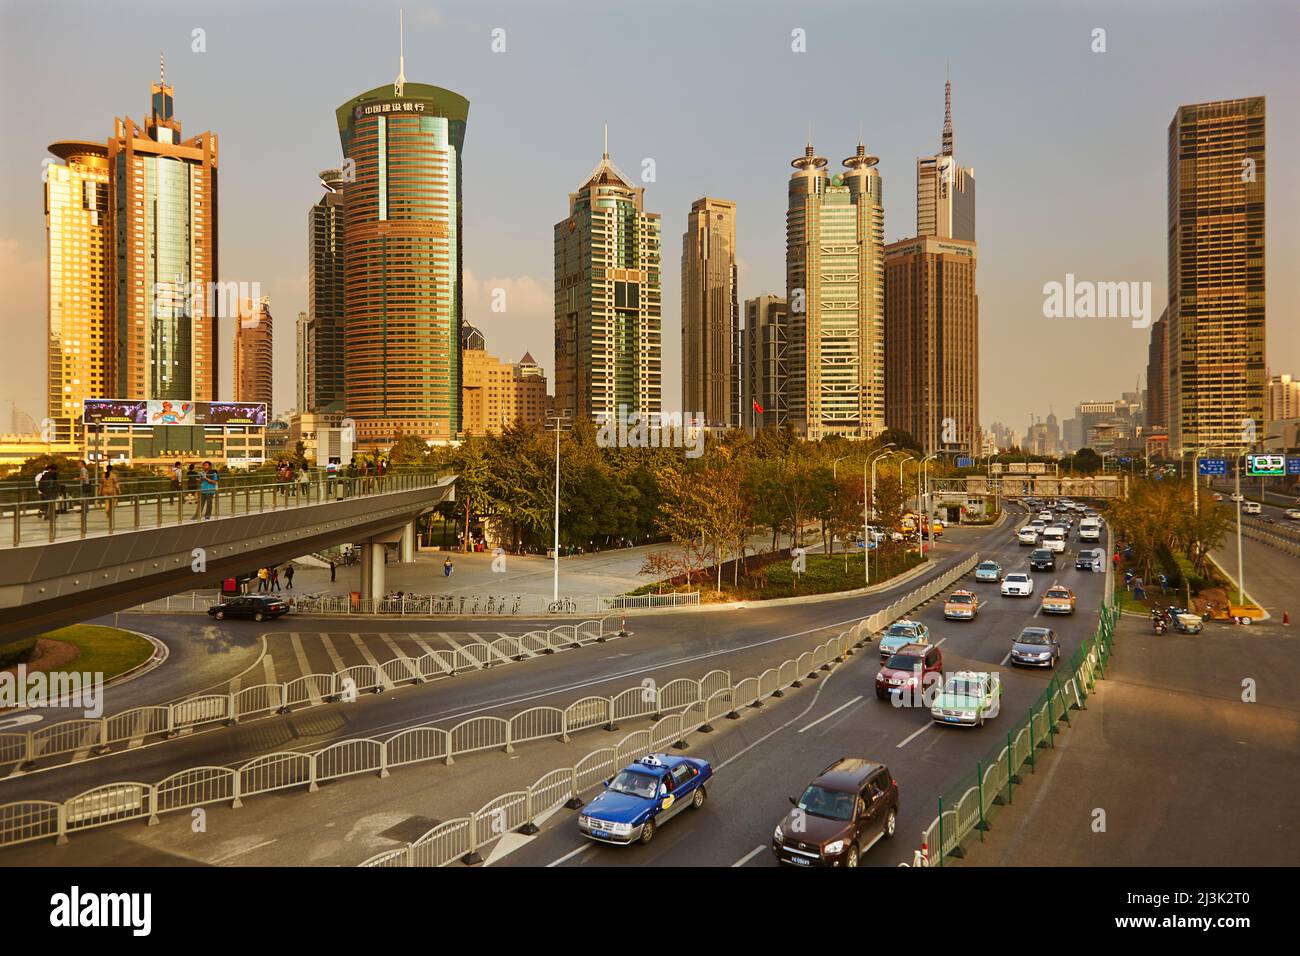 Buildings and traffic in the Lujiazui district of Pudong, Shanghai, China.; Lujiazui, Pudong, Shanghai, China. Stock Photo